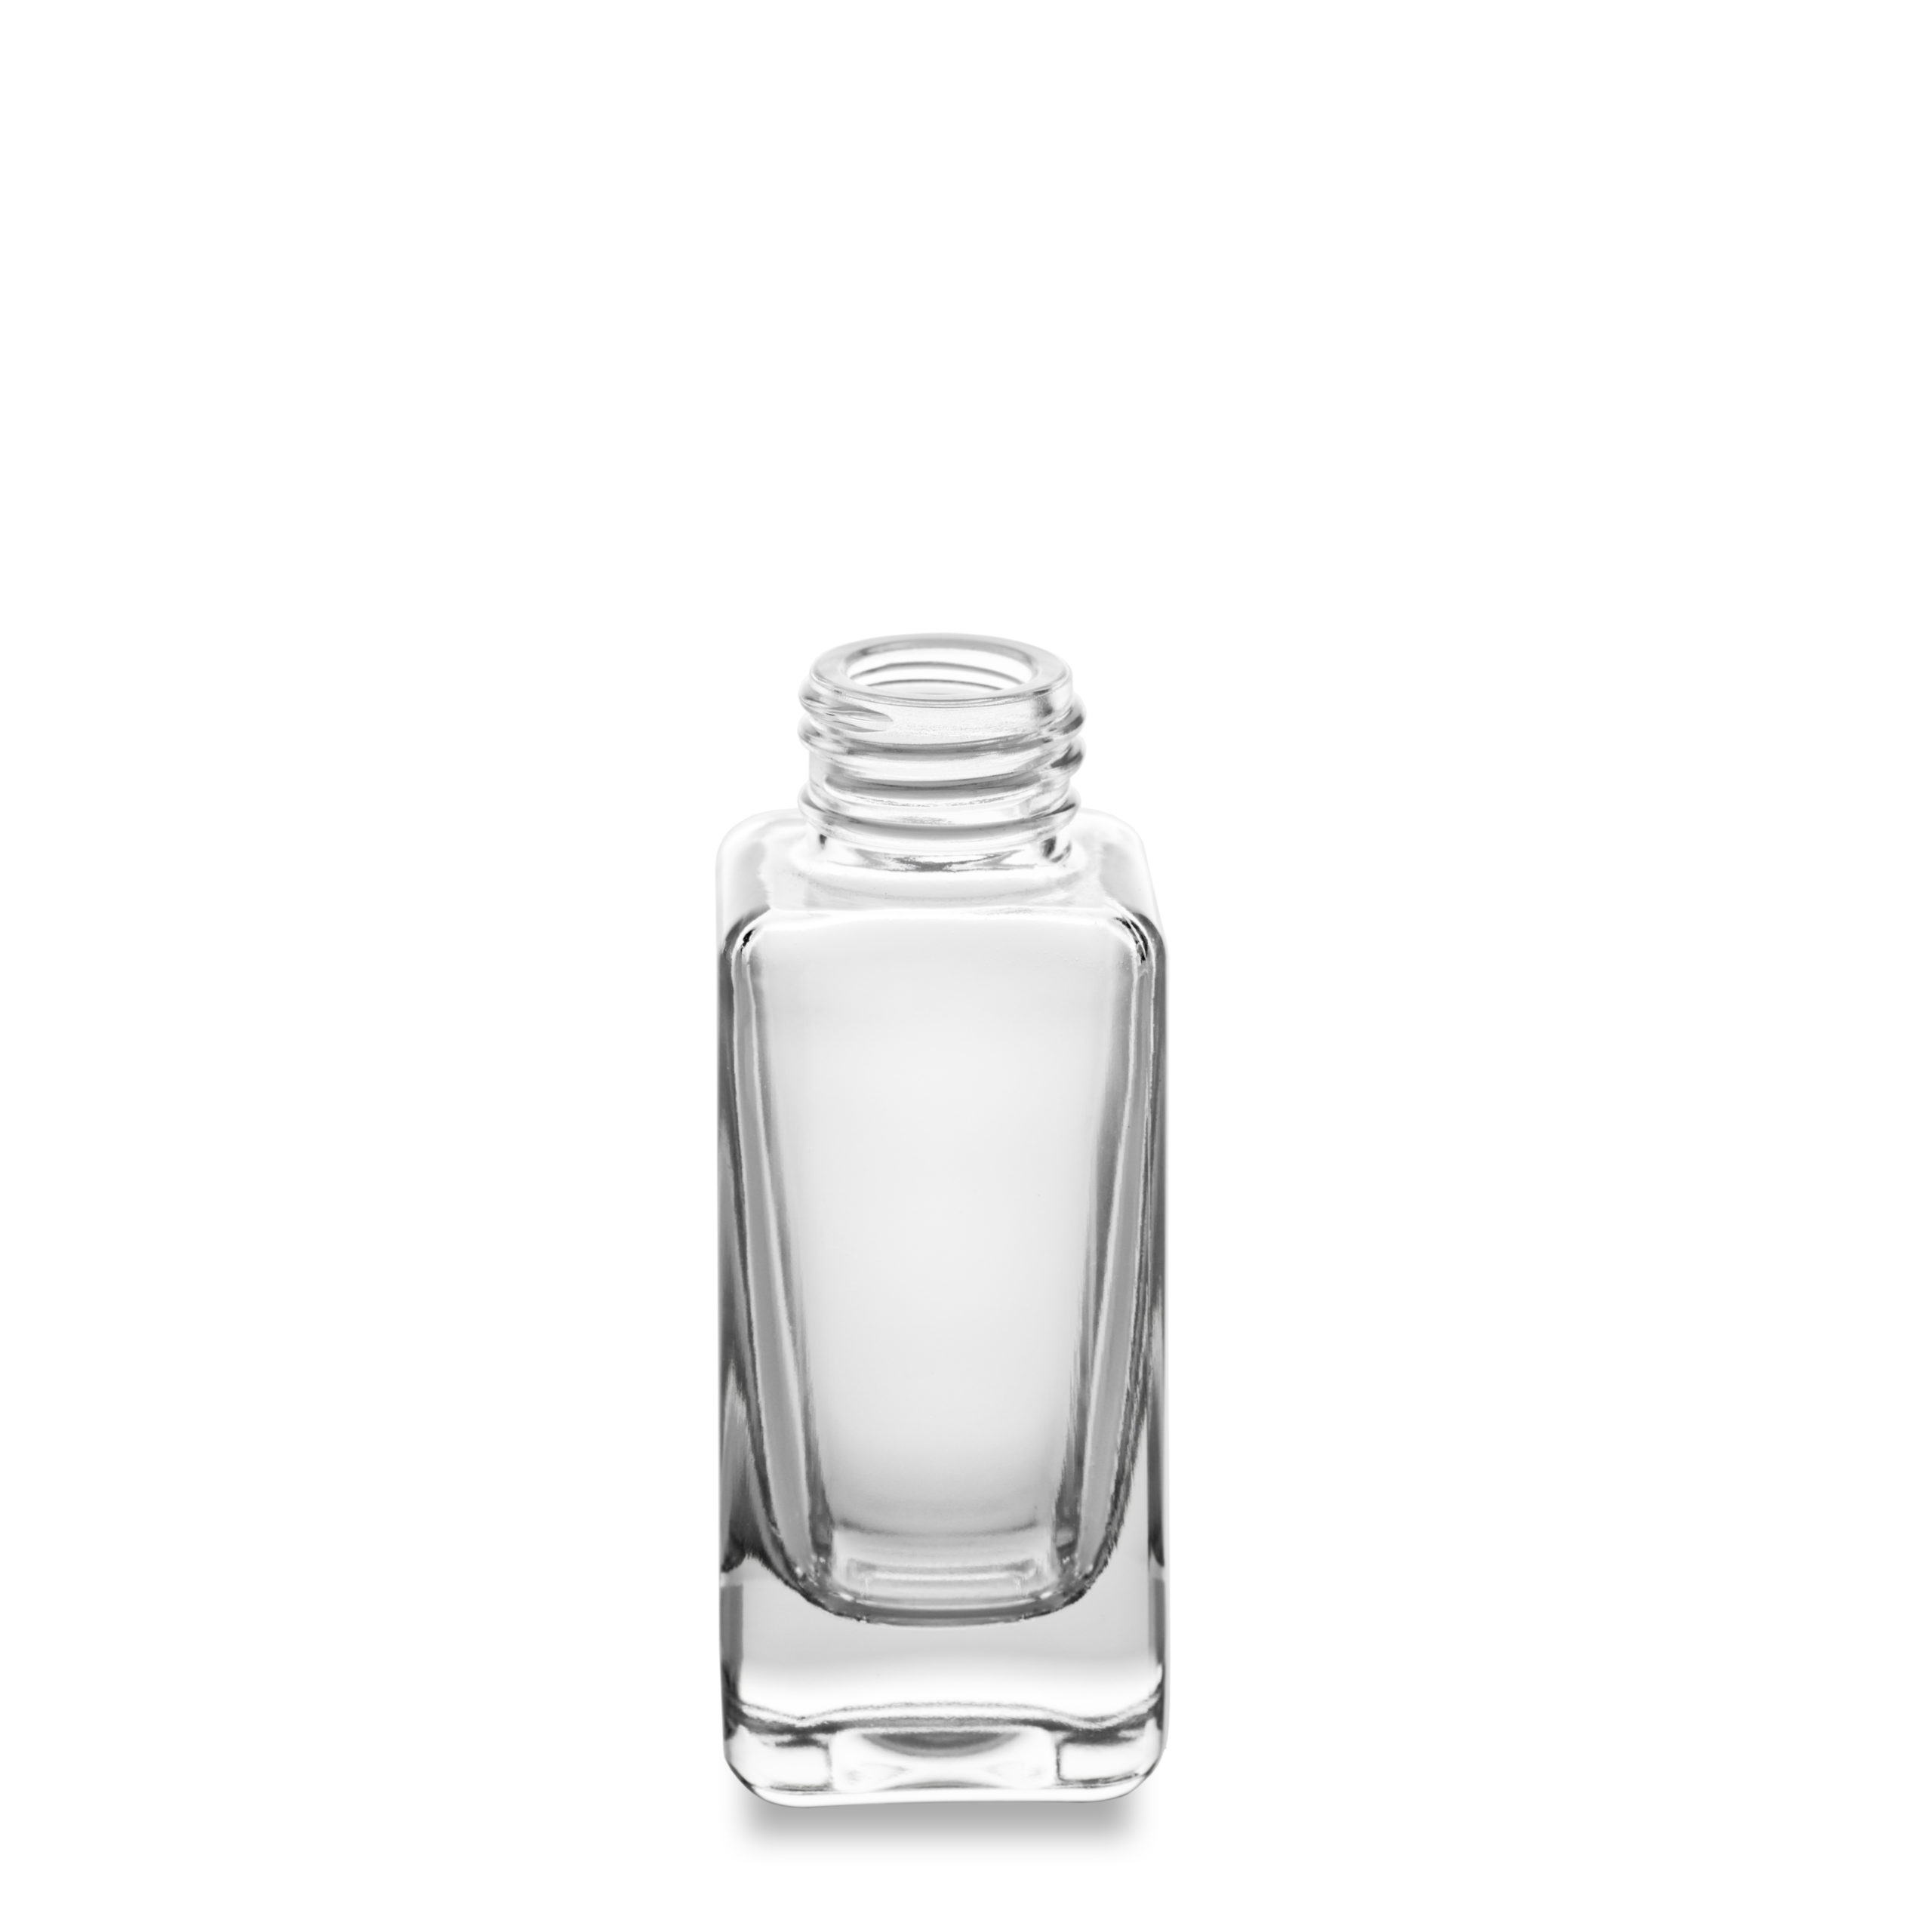 With its square base, a 50ml Atome glass bottle 